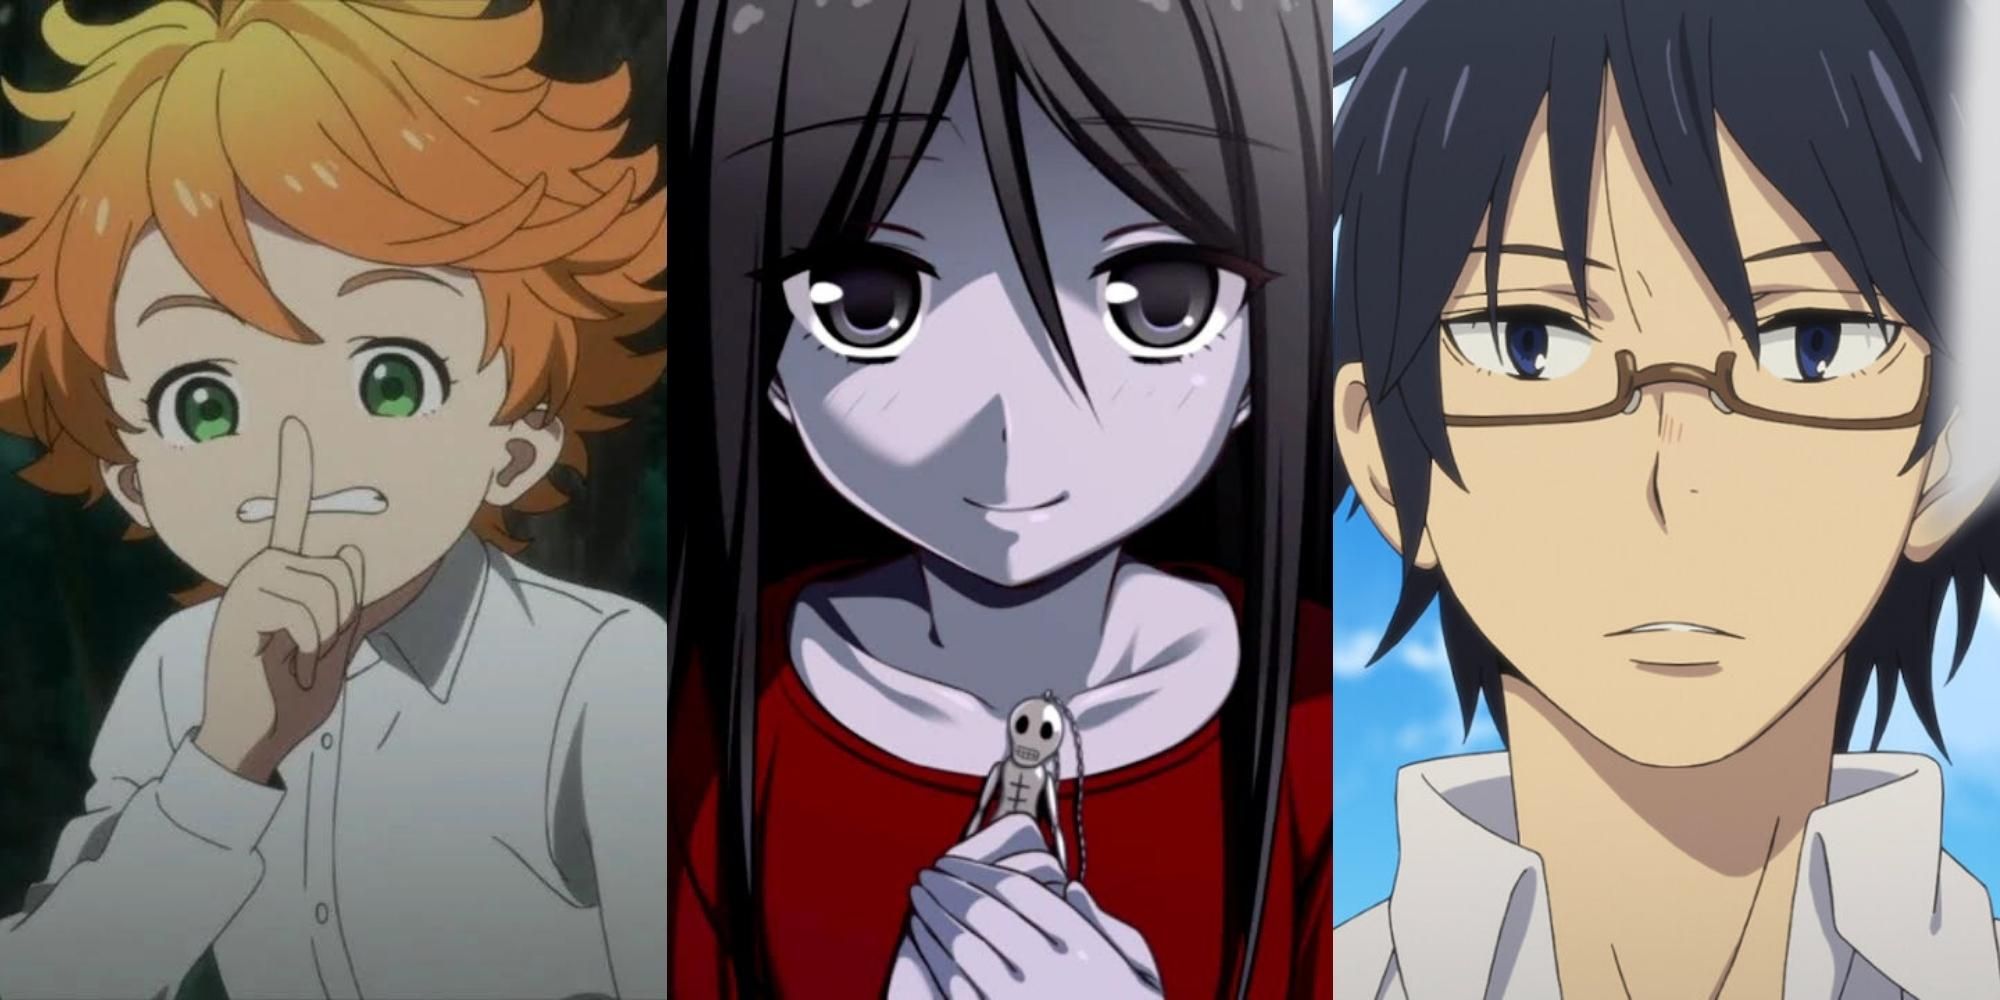 35 Horror Anime SeriesMovies To Freak You Out